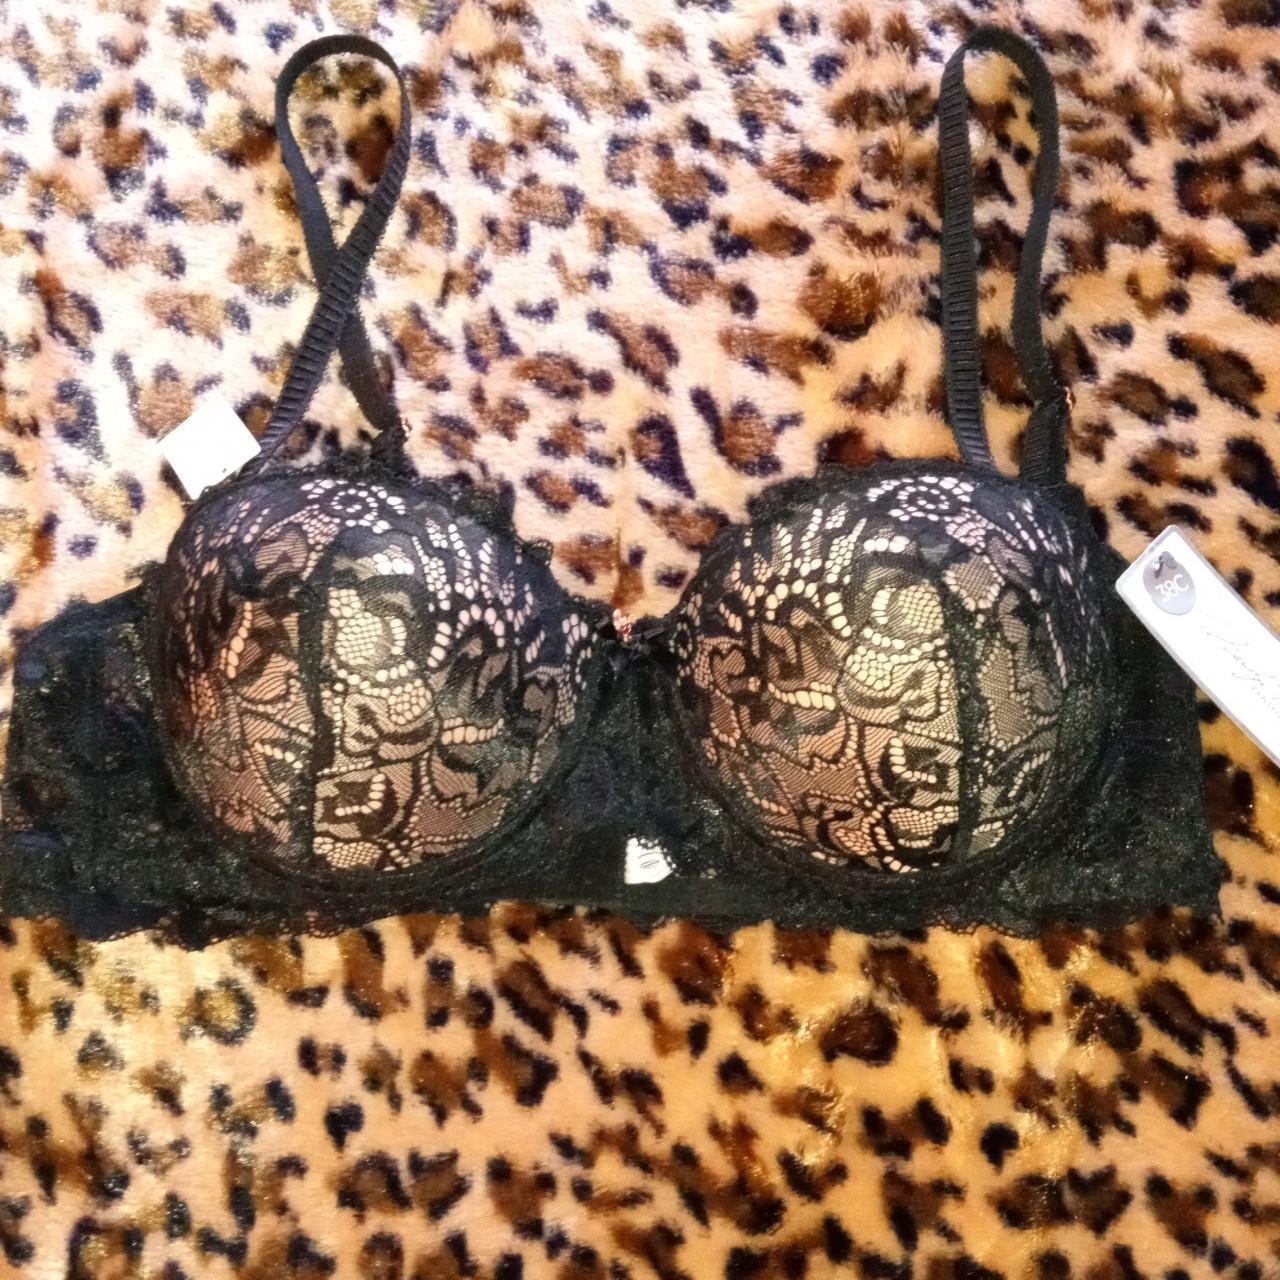 Marilyn Monroe Brand New Bra with tags. 38C it's a - Depop